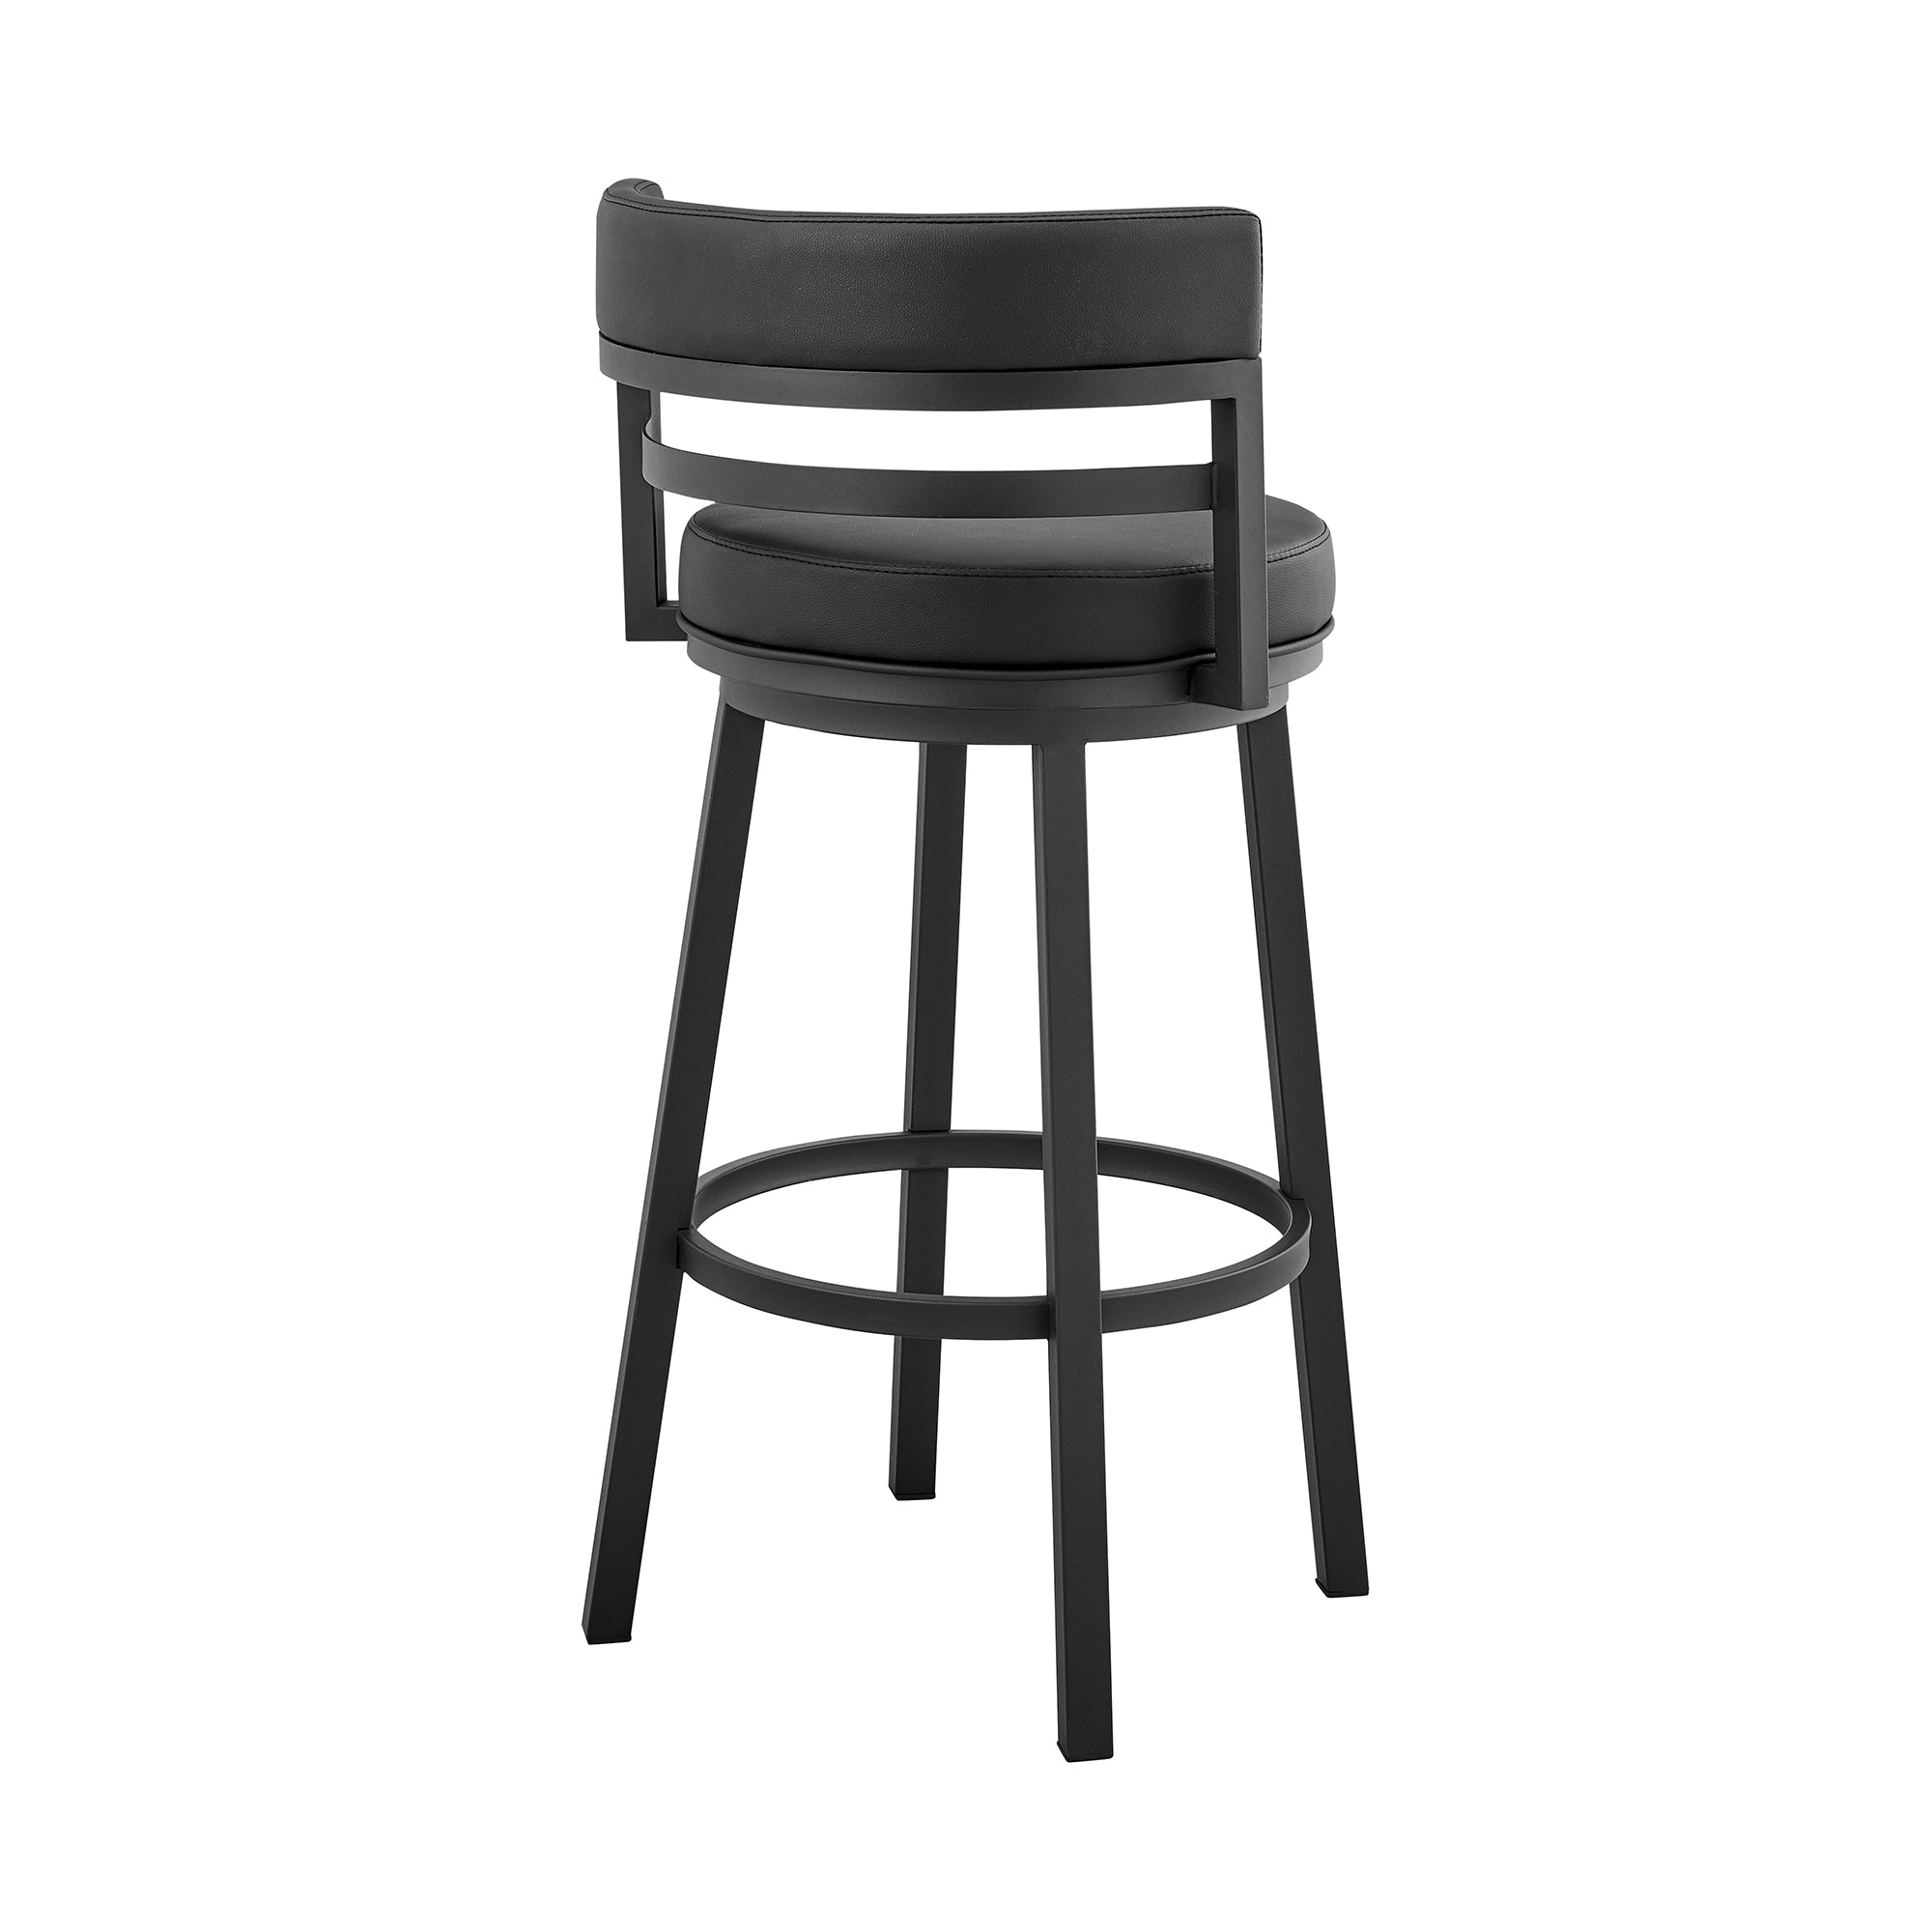 Armen Living - Titana Bar or Counter Stool in Black Faux Leather and Black Metal - 840254335004